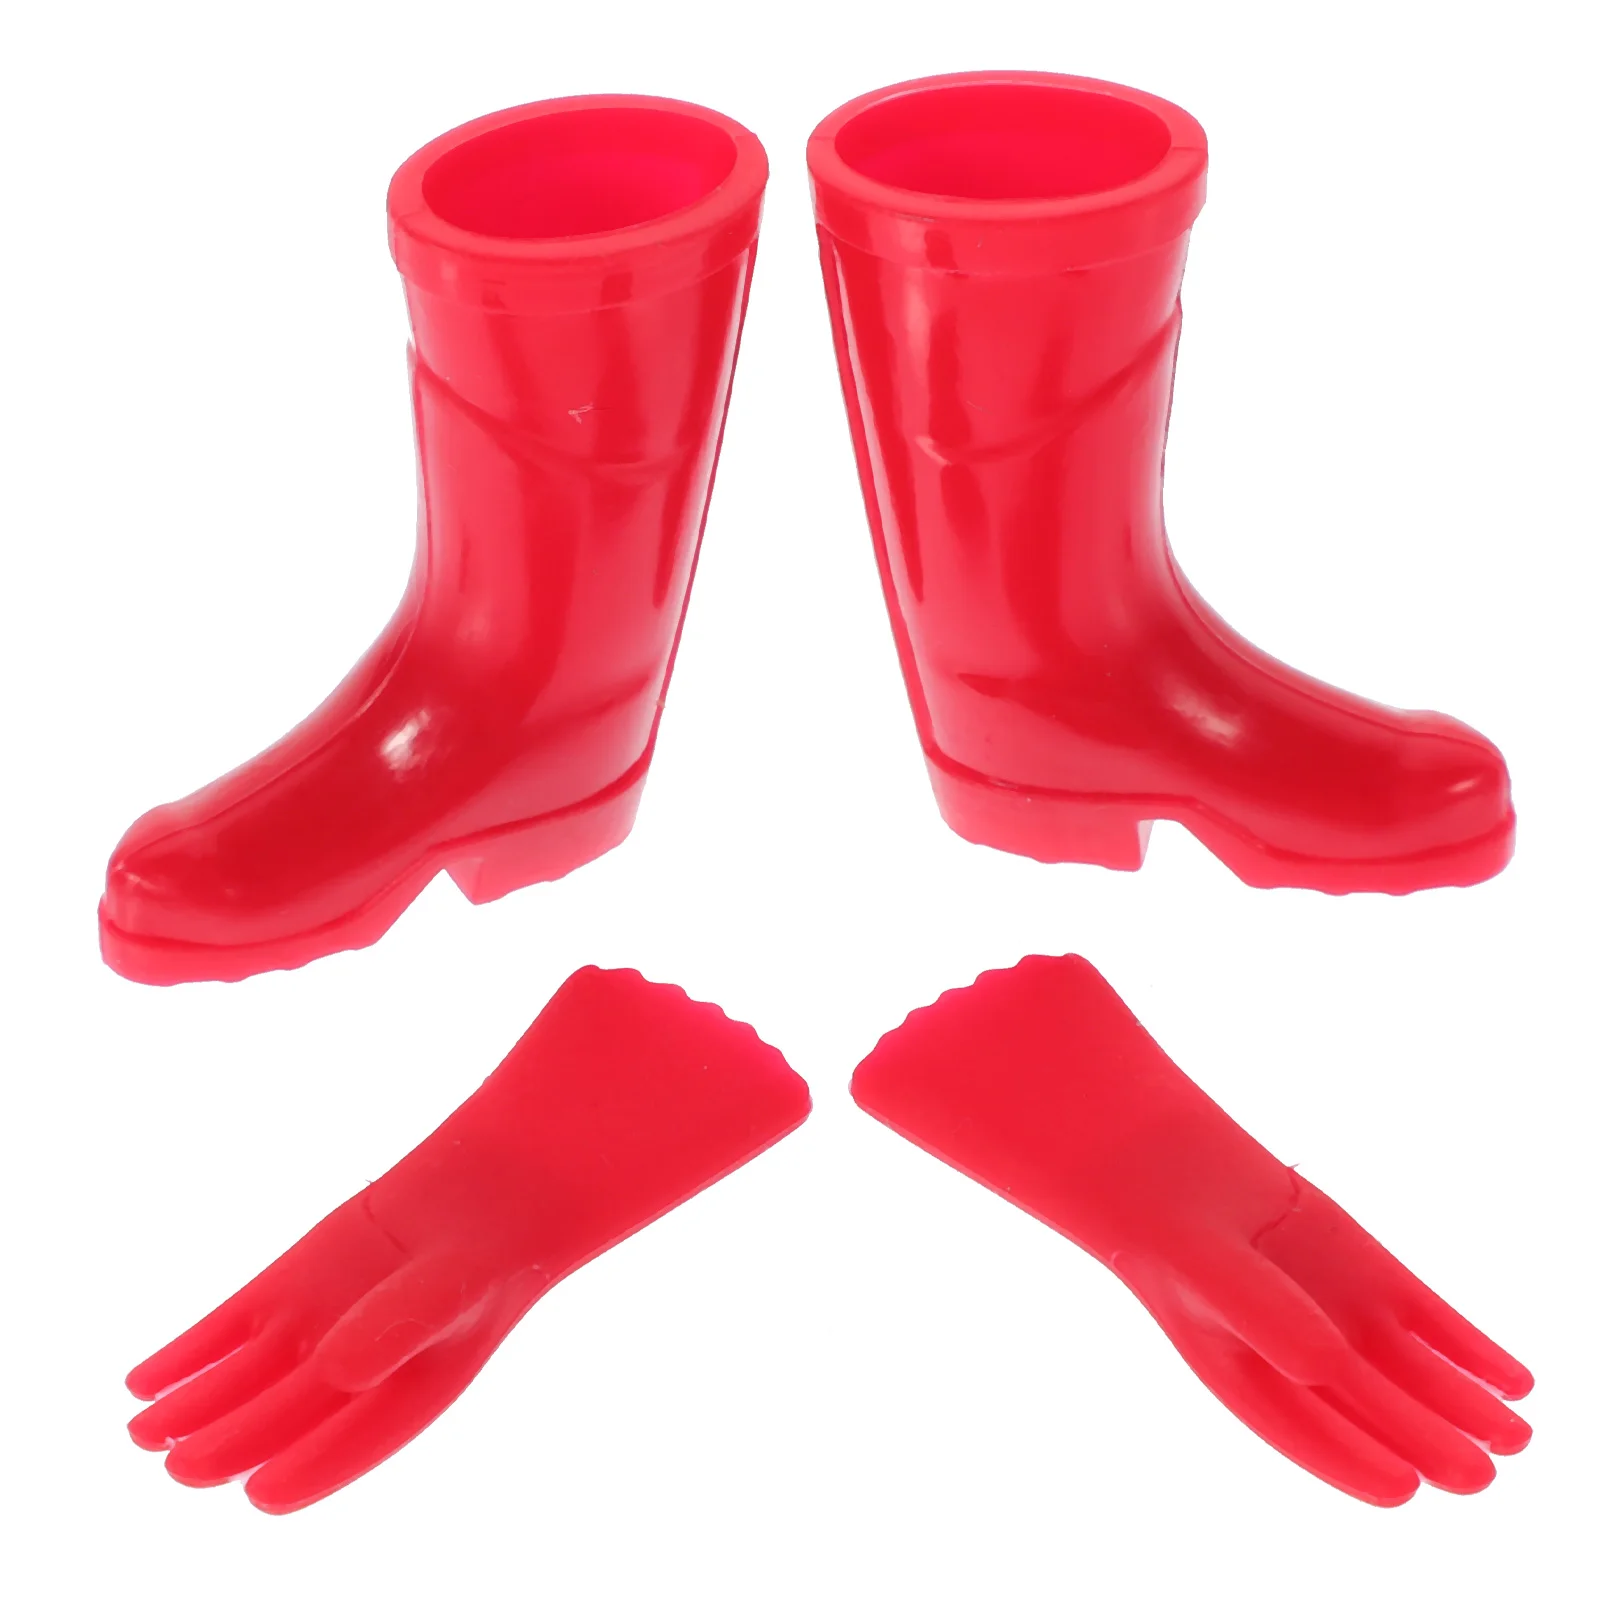 House Gloves Gloves House Supplies Simulated Dollhouse Miniature Accessories Shoes Rainshoes Layout Prop